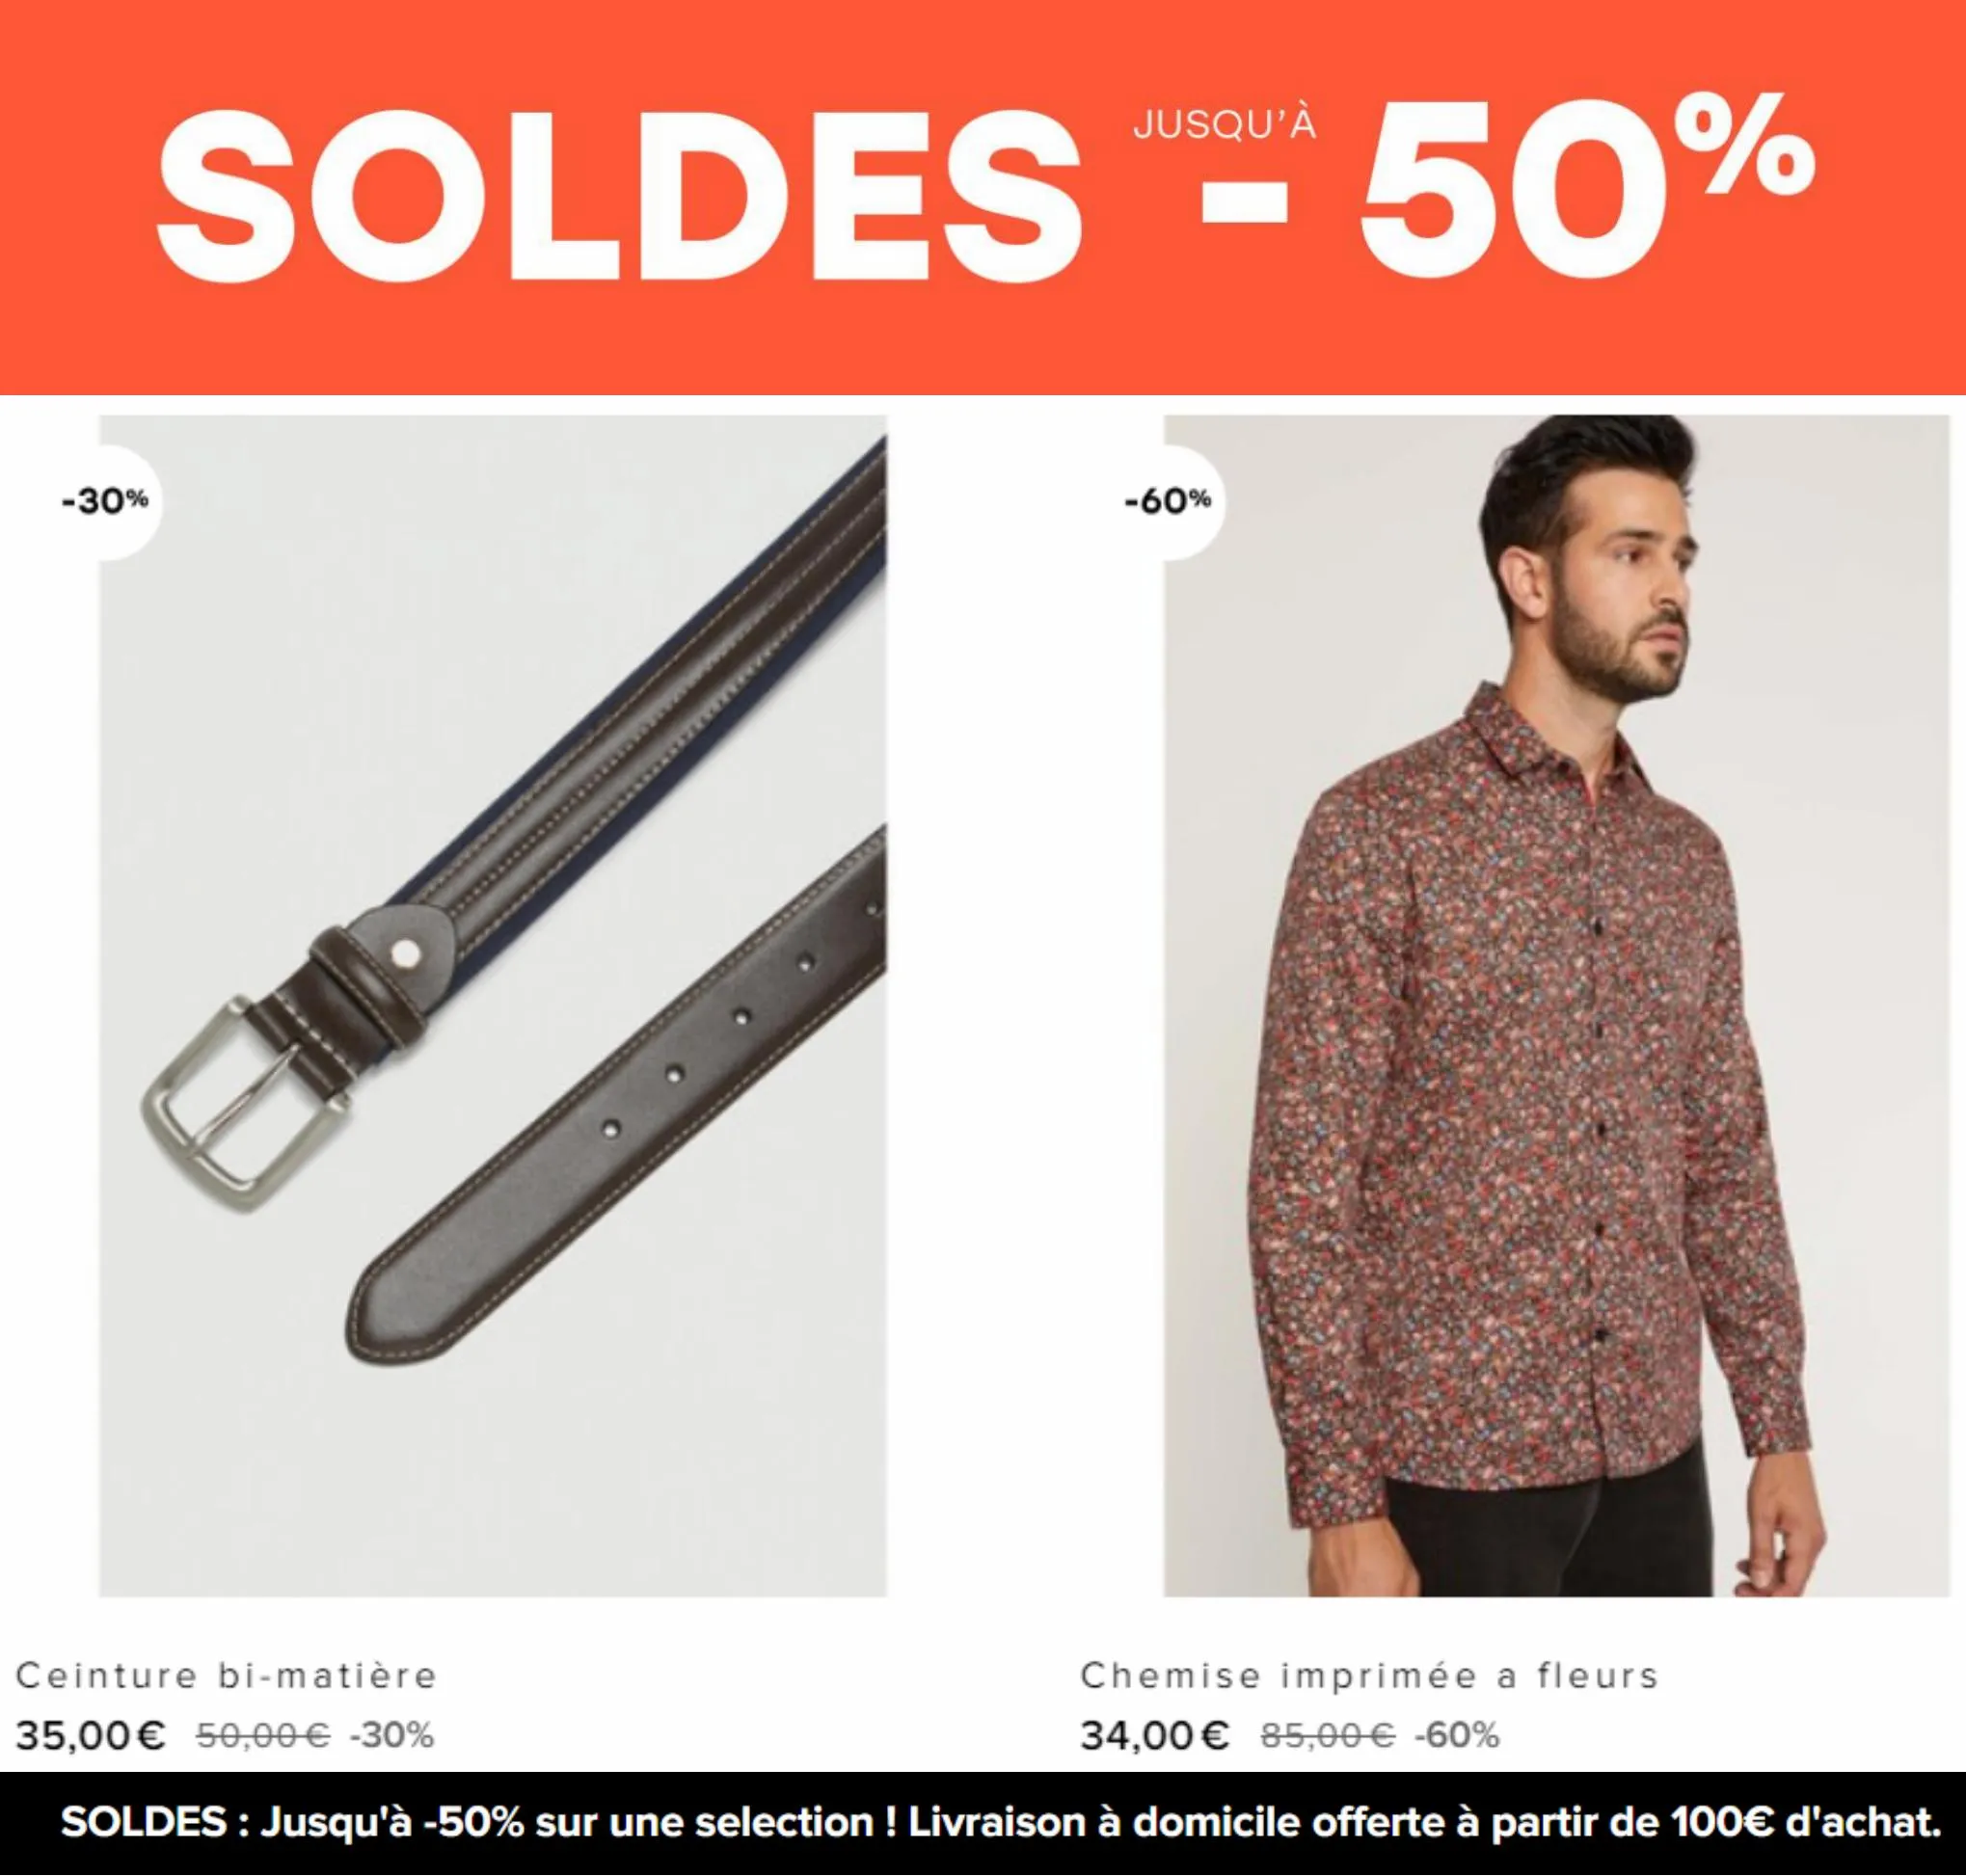 Catalogue Soldes -50% Homme, page 00007